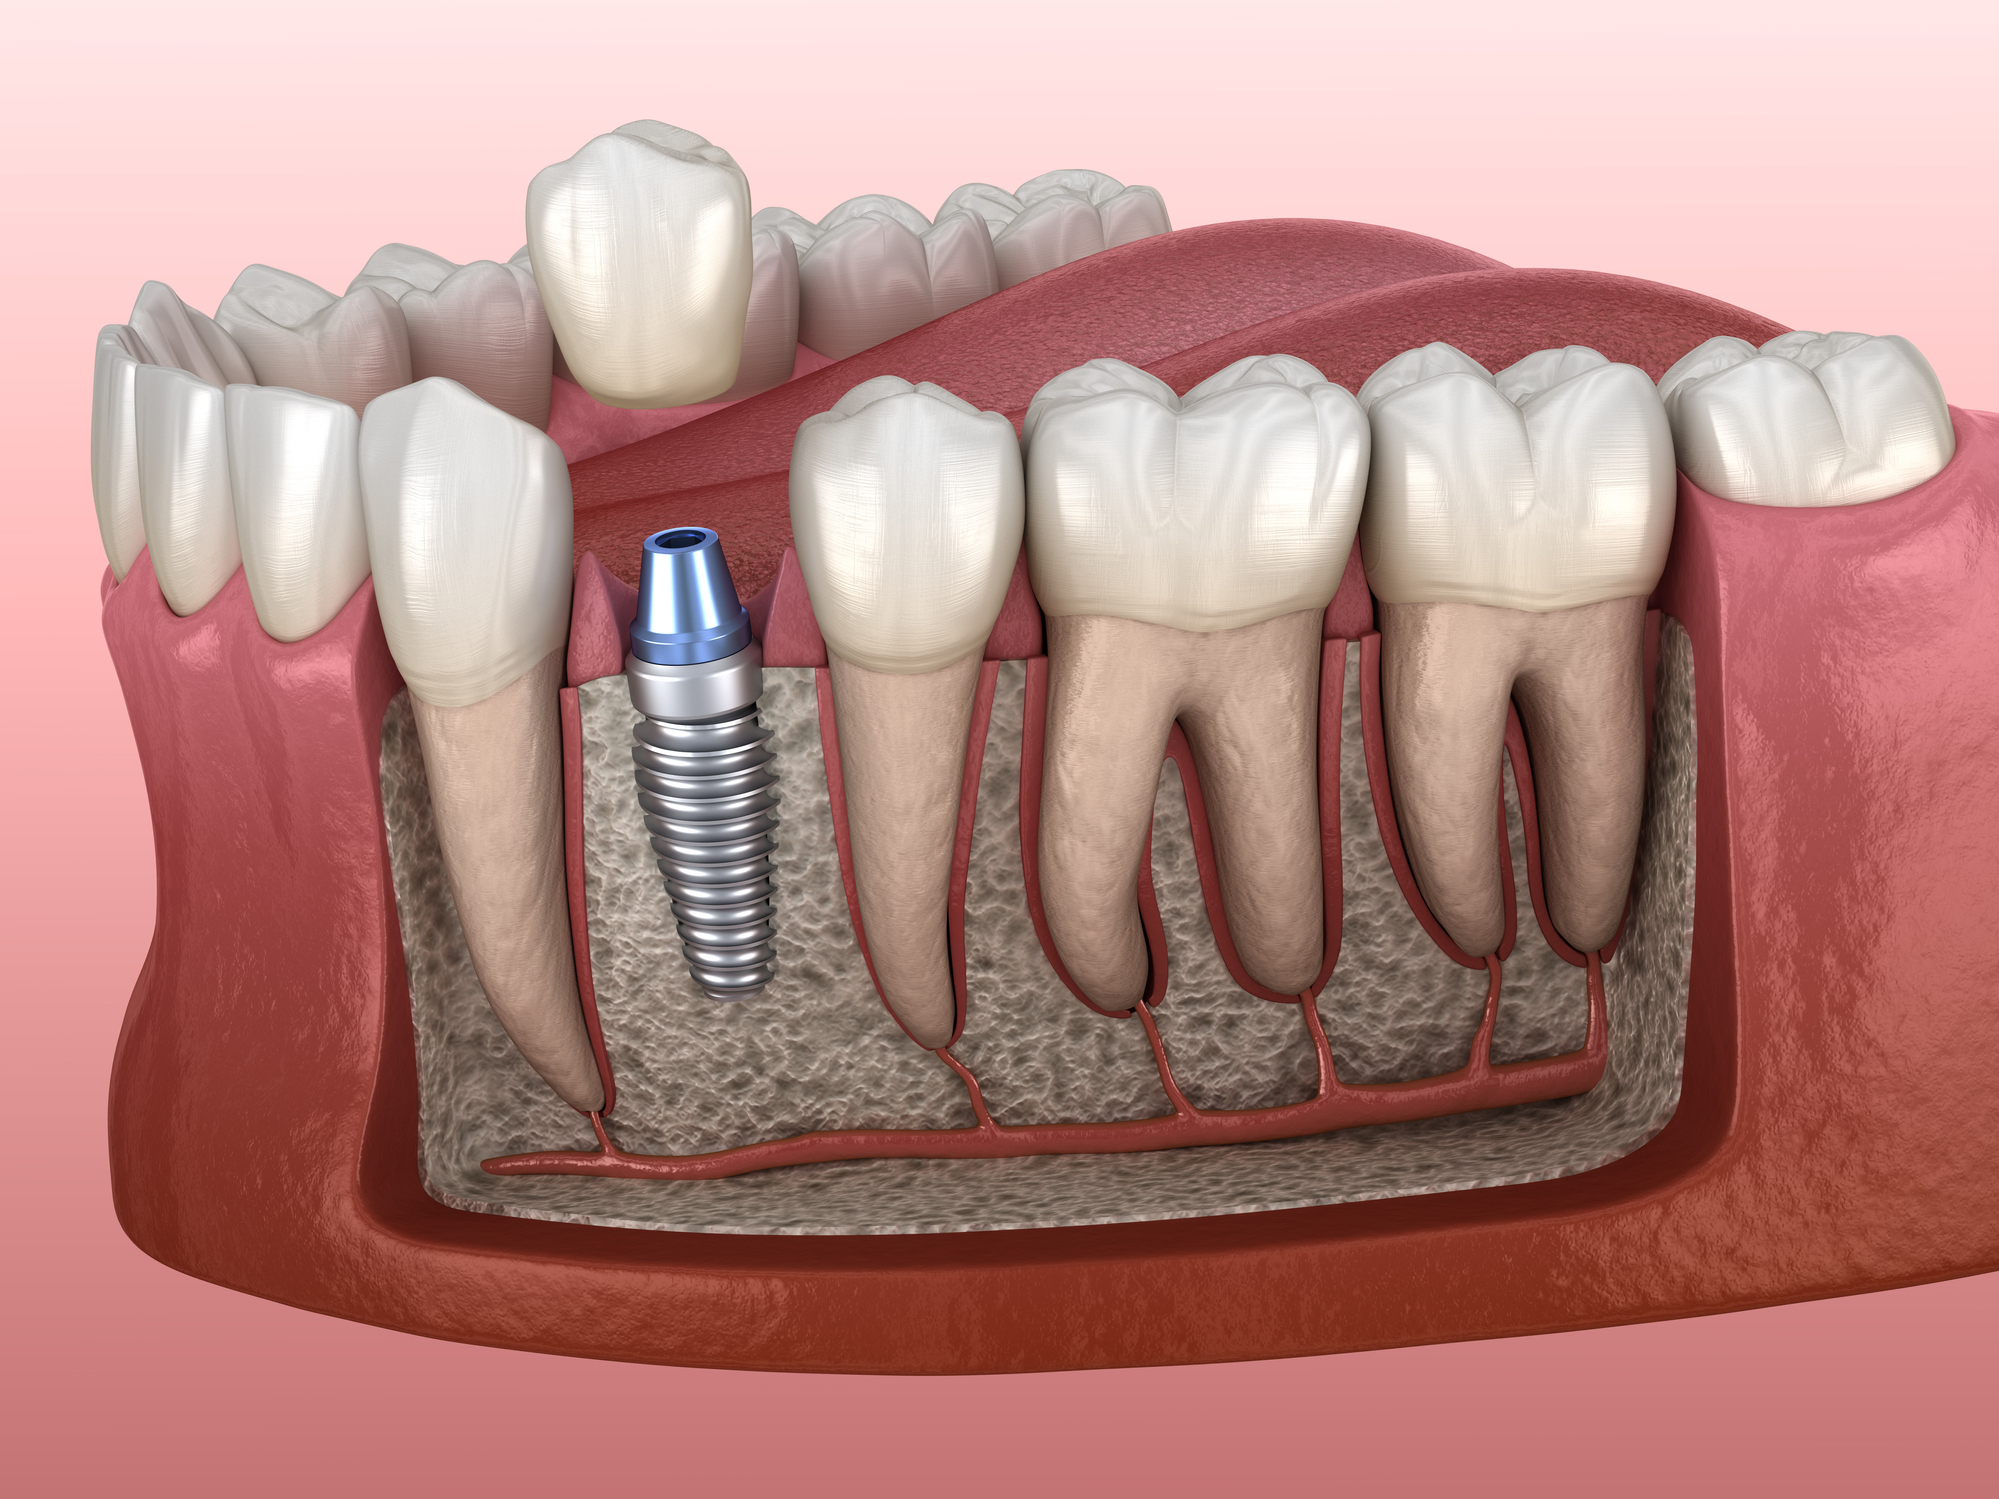 Dental Implants - Premolar tooth crown installation over implant abutment.